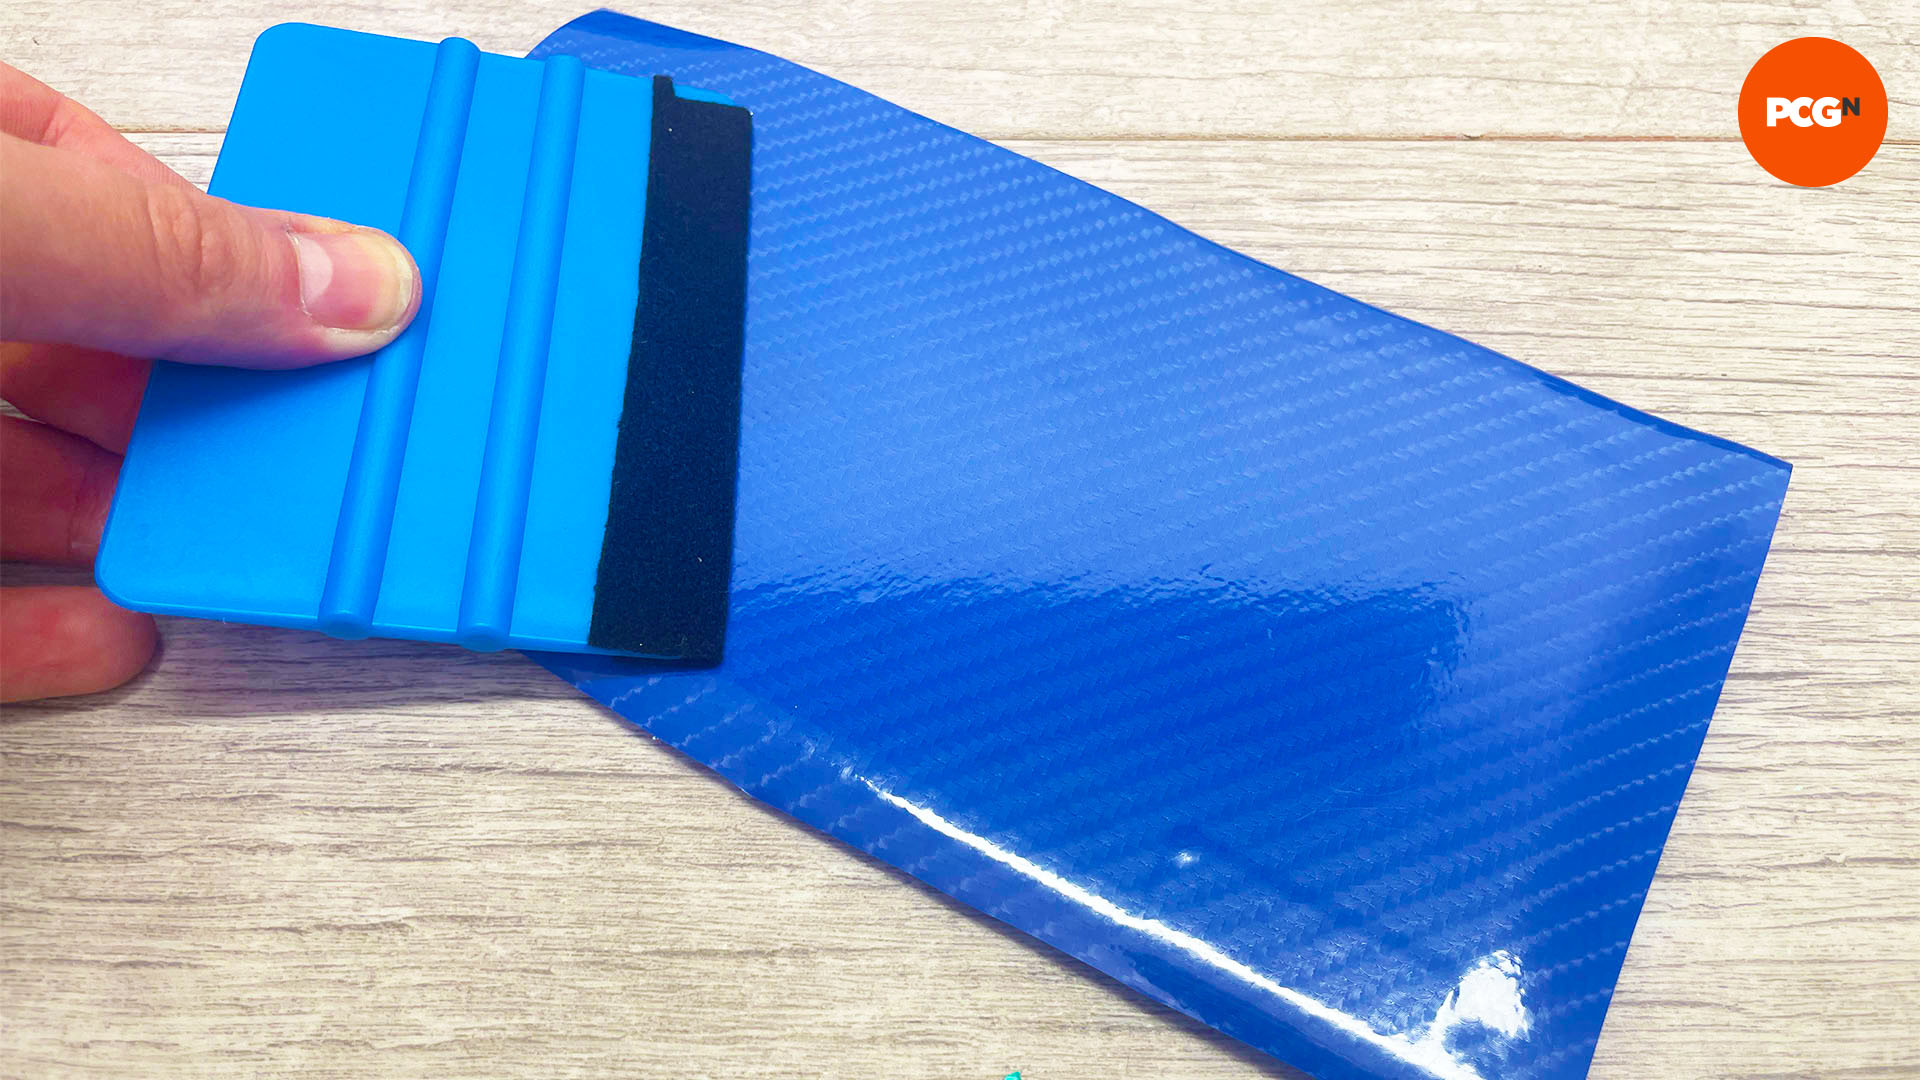 How to change your graphics card color: Apply vinyl with a squeegee